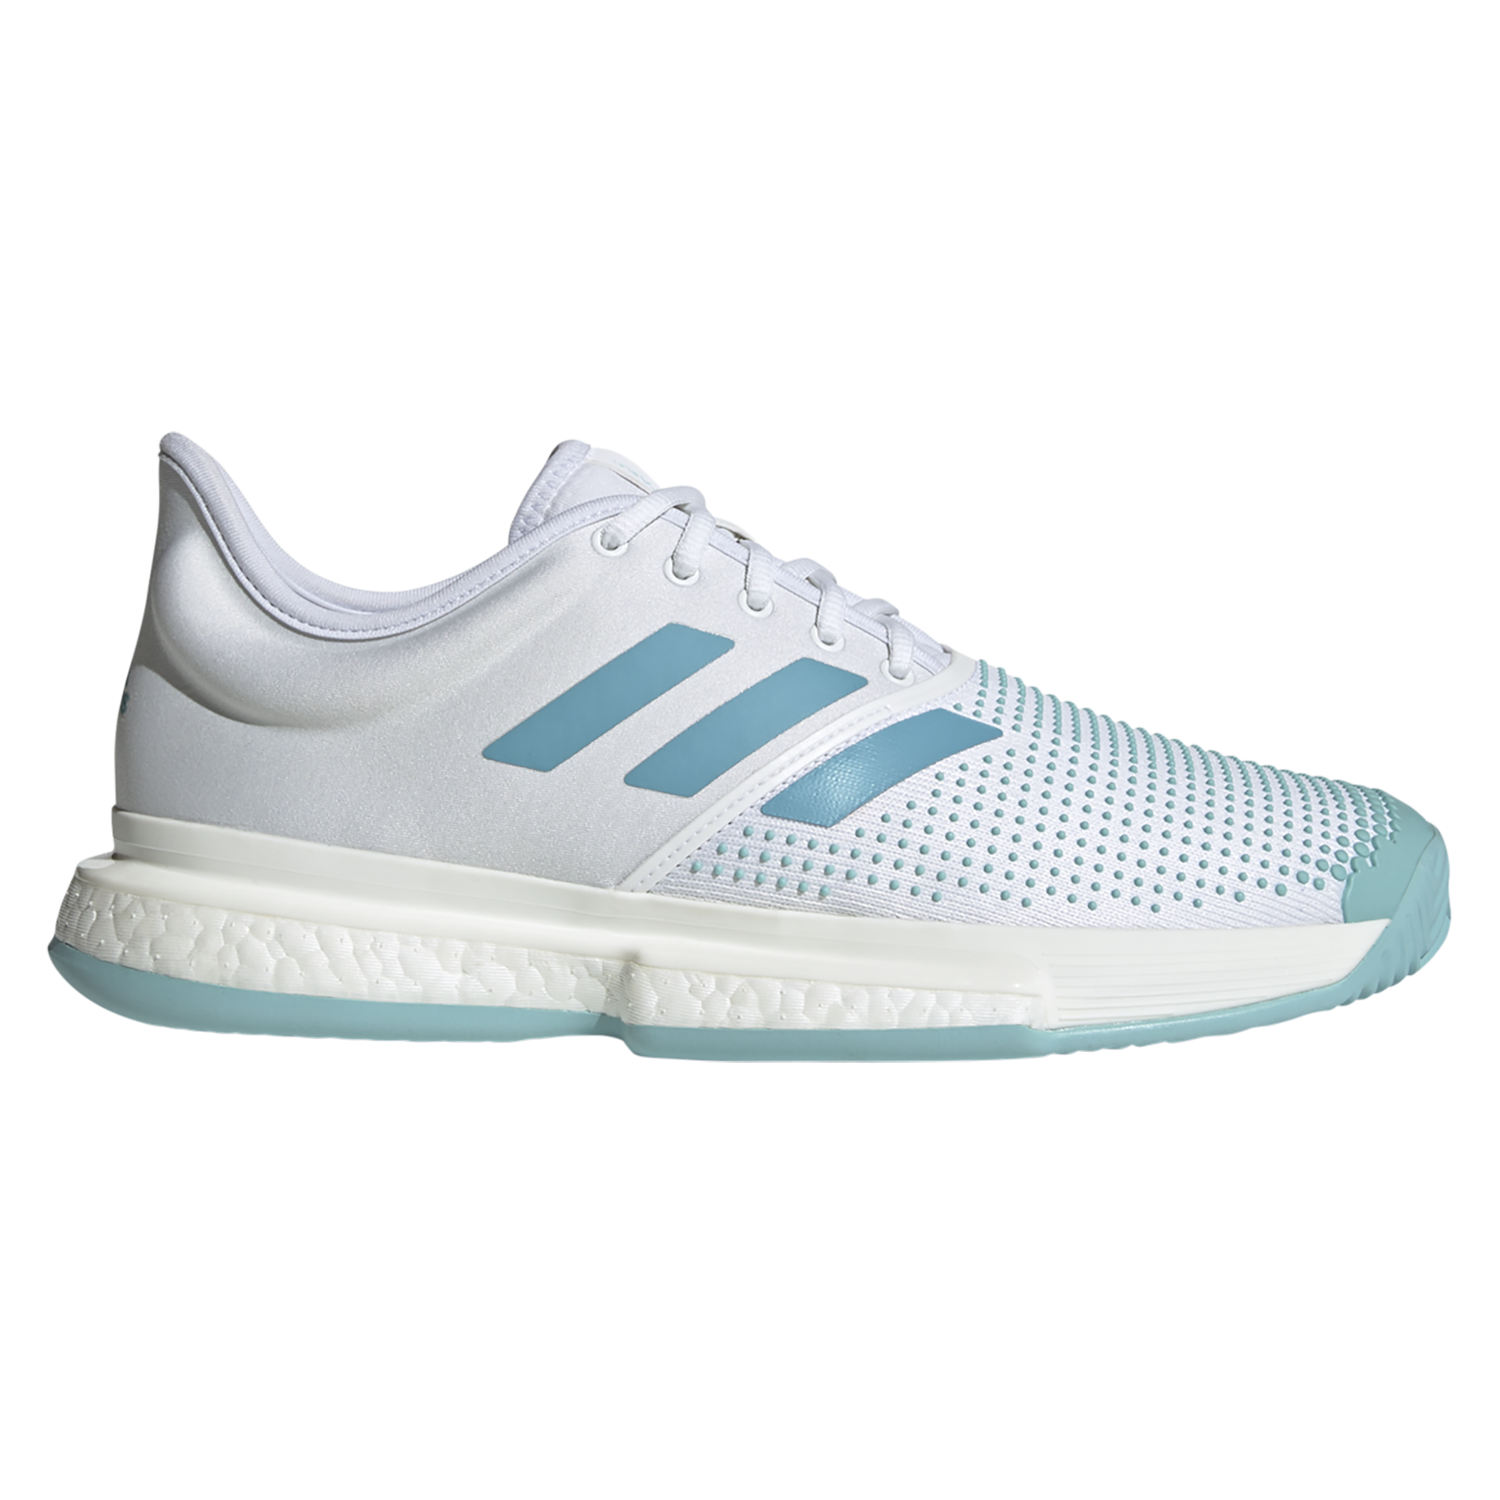 Fascinating Possible Prophecy adidas SoleCourt Boost x Parley Men's Tennis Shoes - White/Blue | PGA TOUR  Superstore